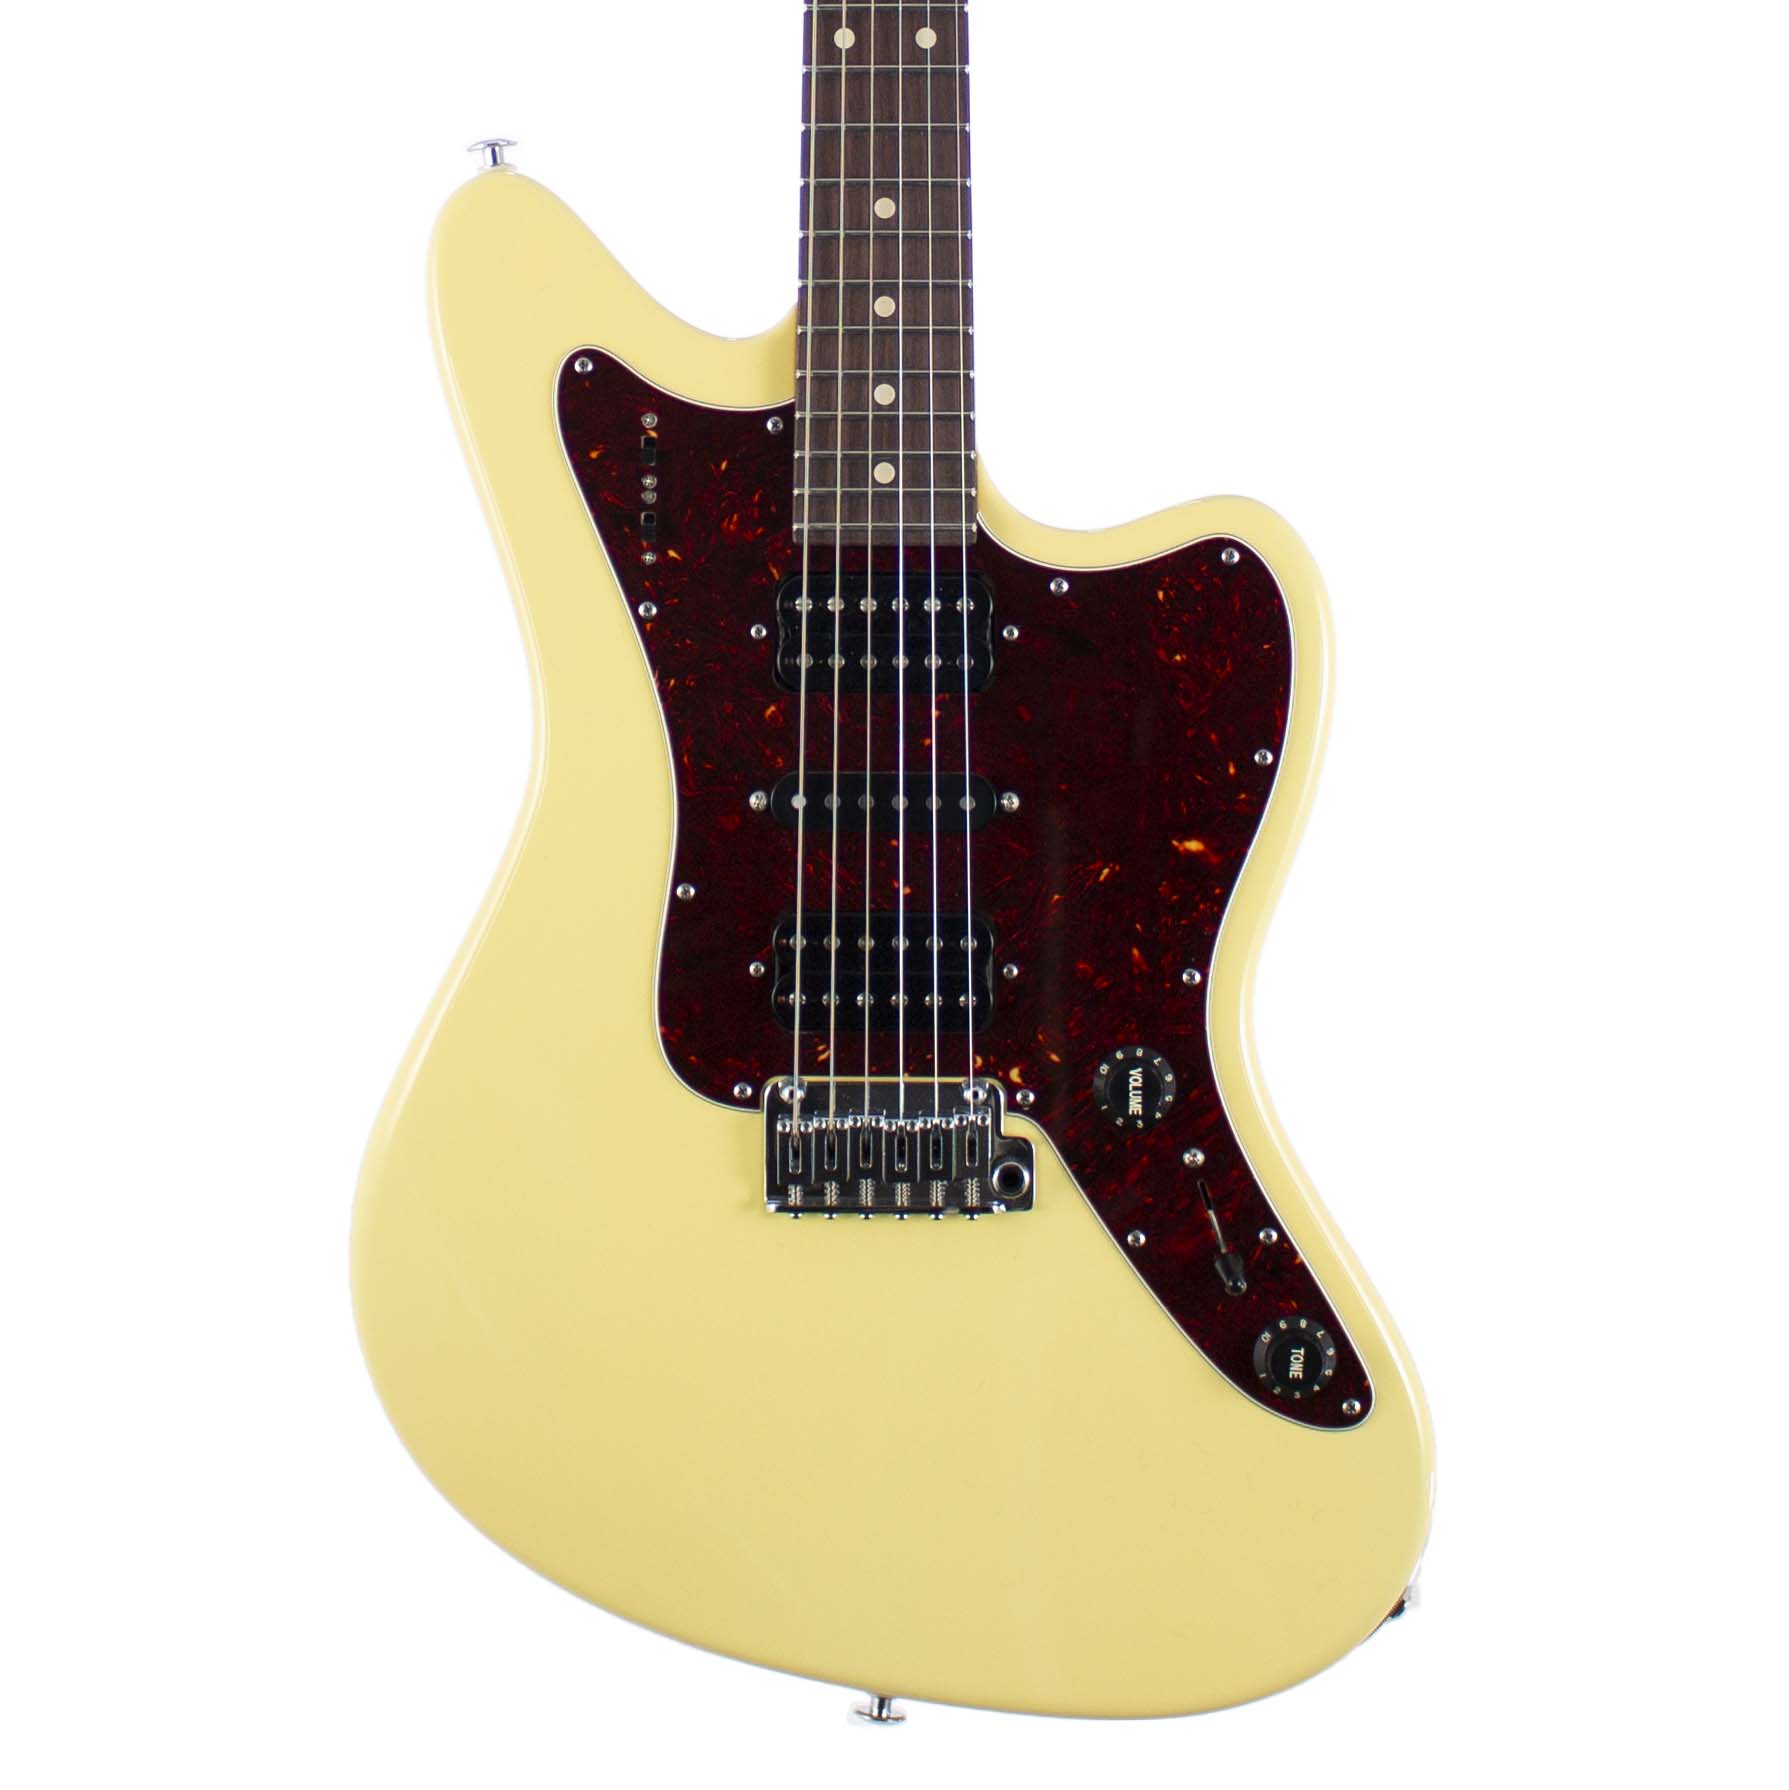 Suhr Ian Thornley Signature Vintage Yellow HSH 510